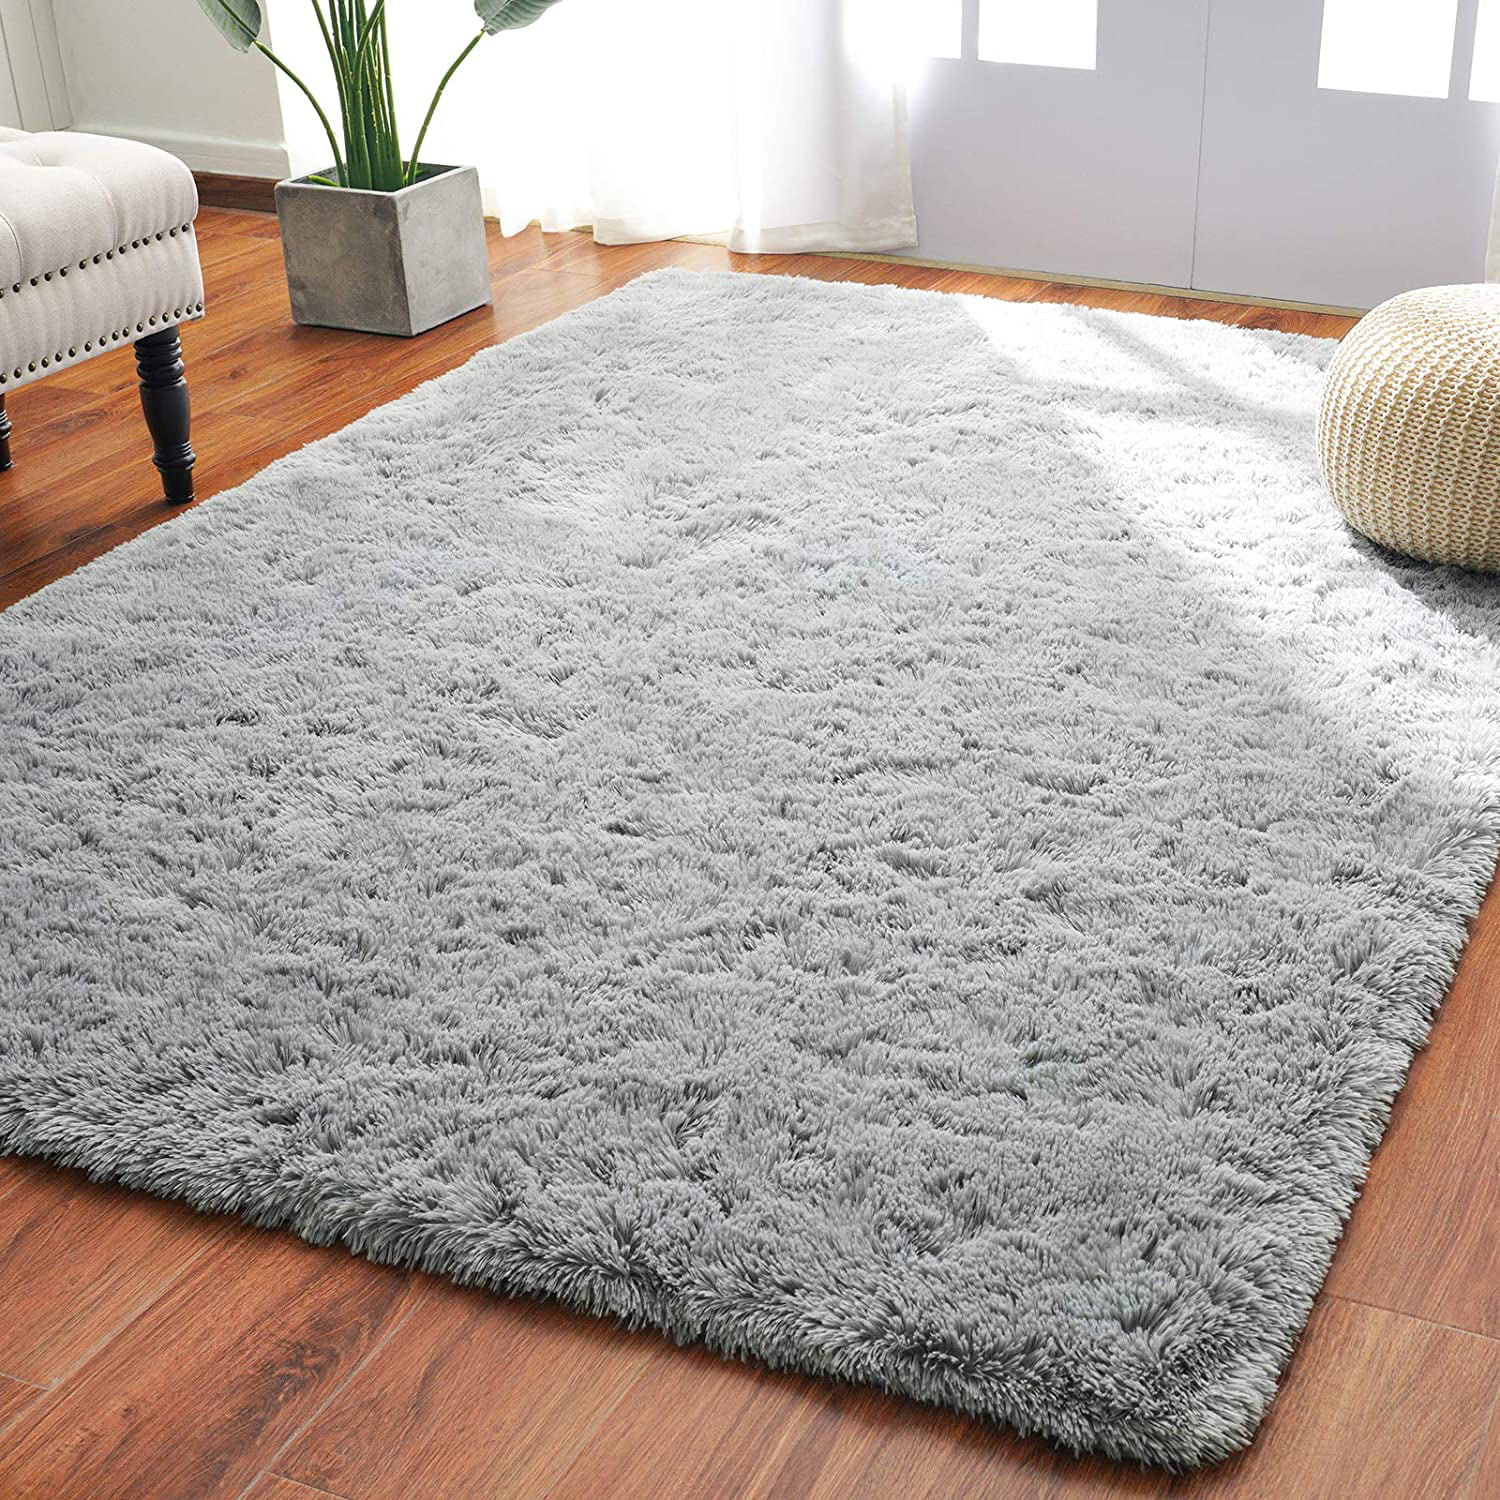 Grey Gy Floor Carpet Cute Rug, What Is The Softest Area Rug Material